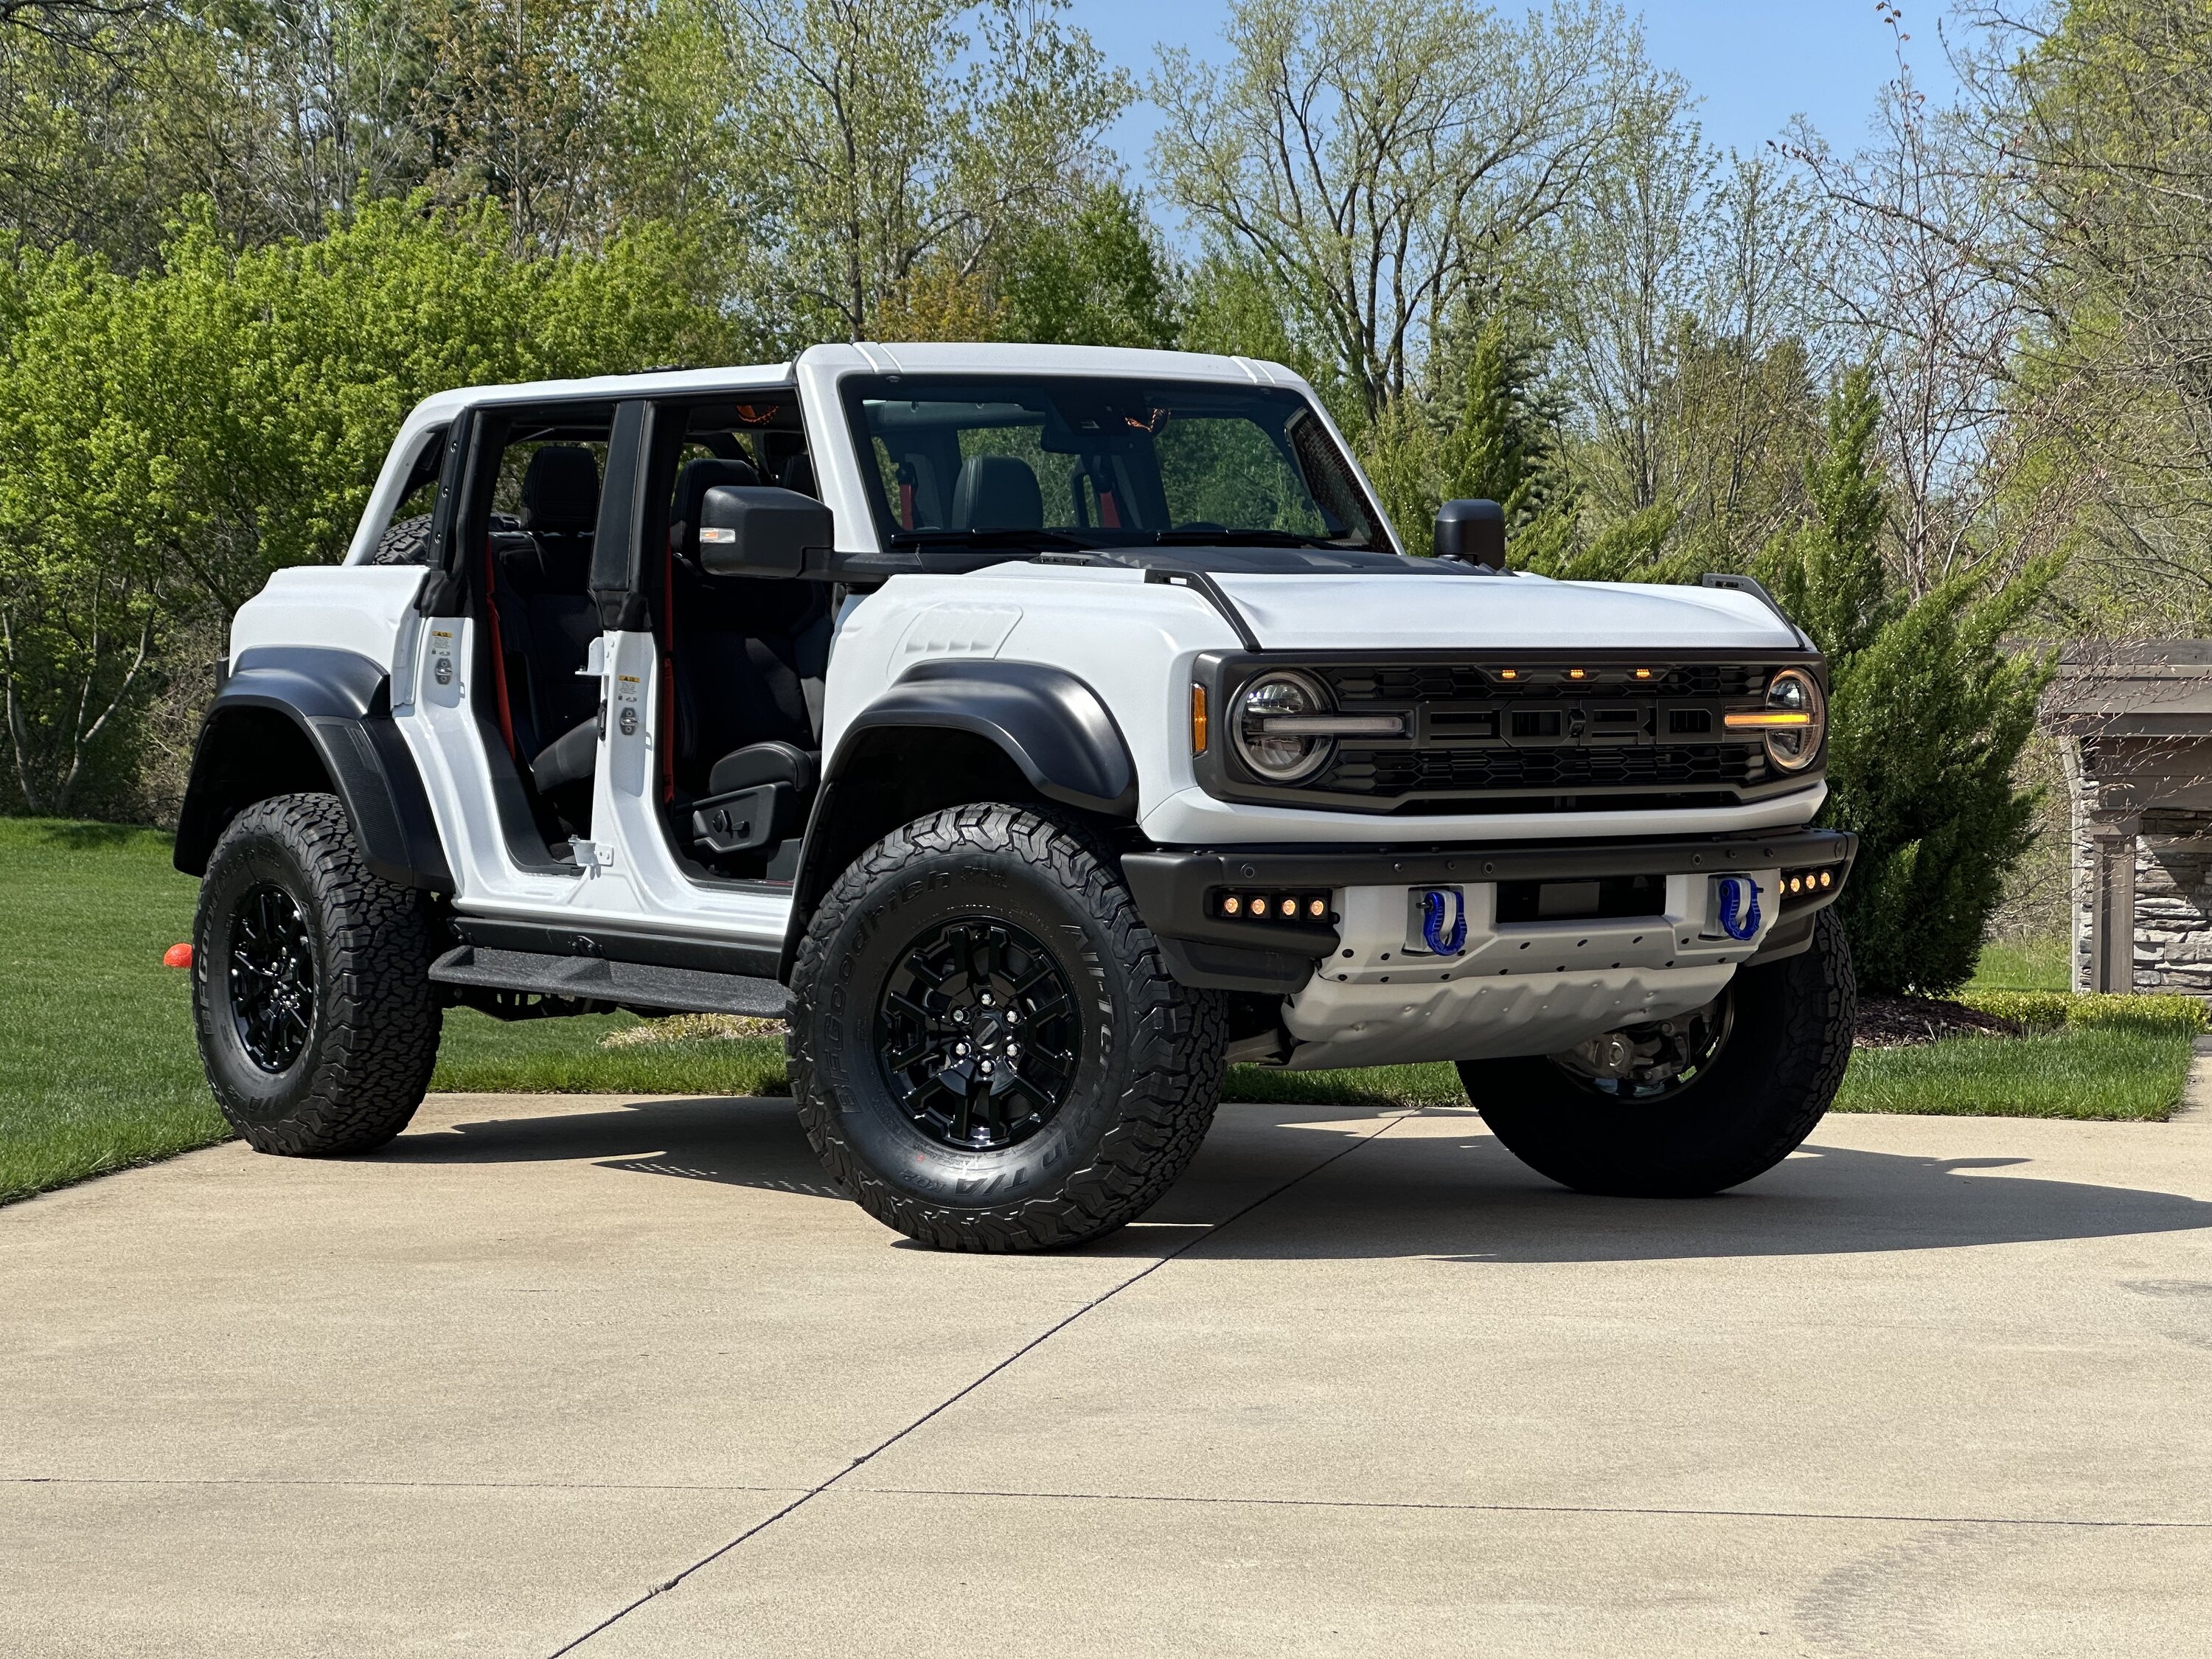 Ford Bronco XPEL Stealth PPF Wrap Completed on Bronco Raptor in Oxford White img_1275-jpe